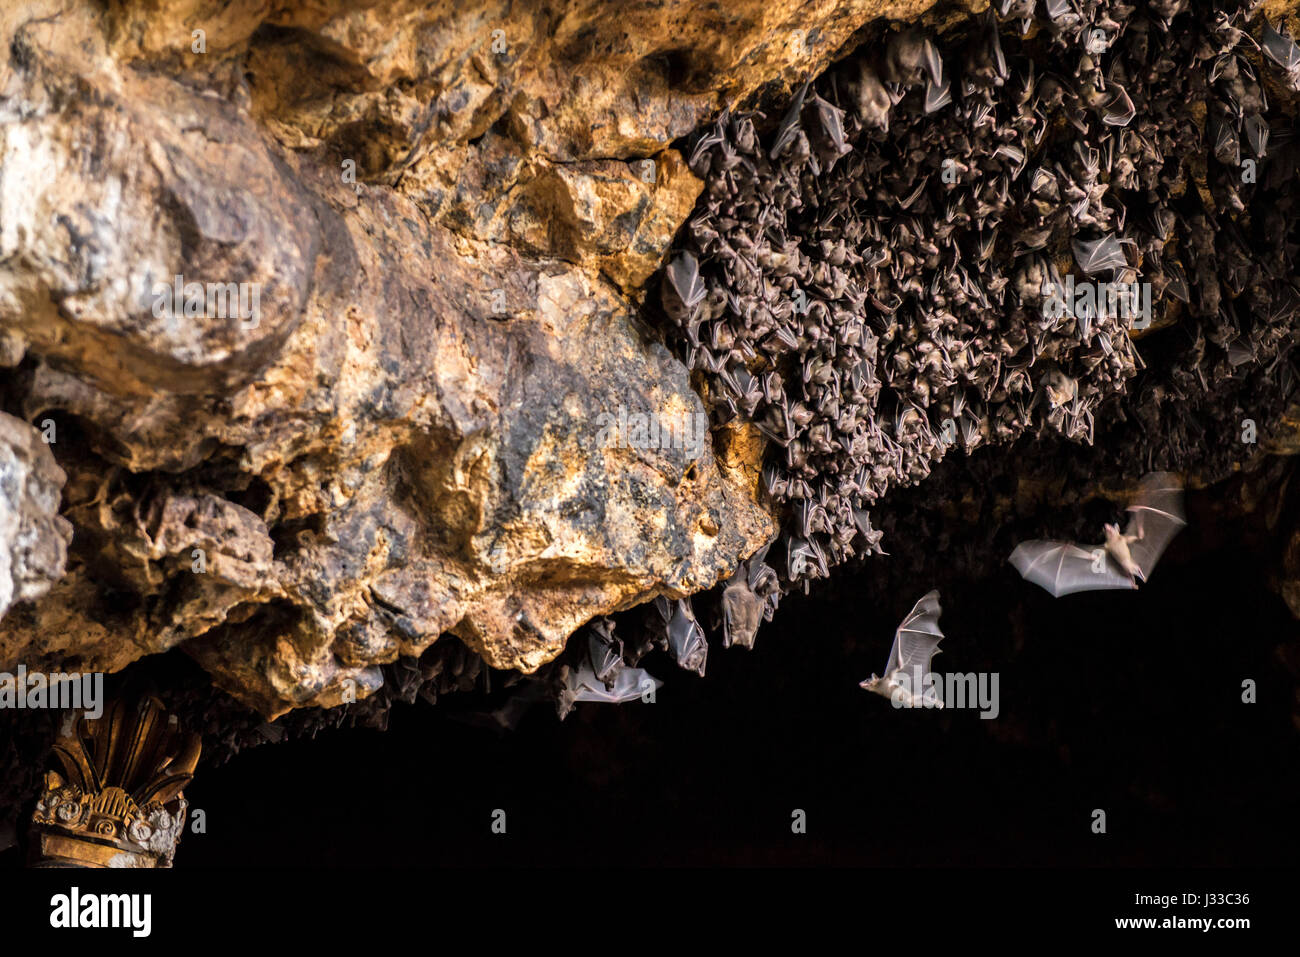 Bat colony in front of a cave entrance, near Padangbay, Bali, Indonesia Stock Photo